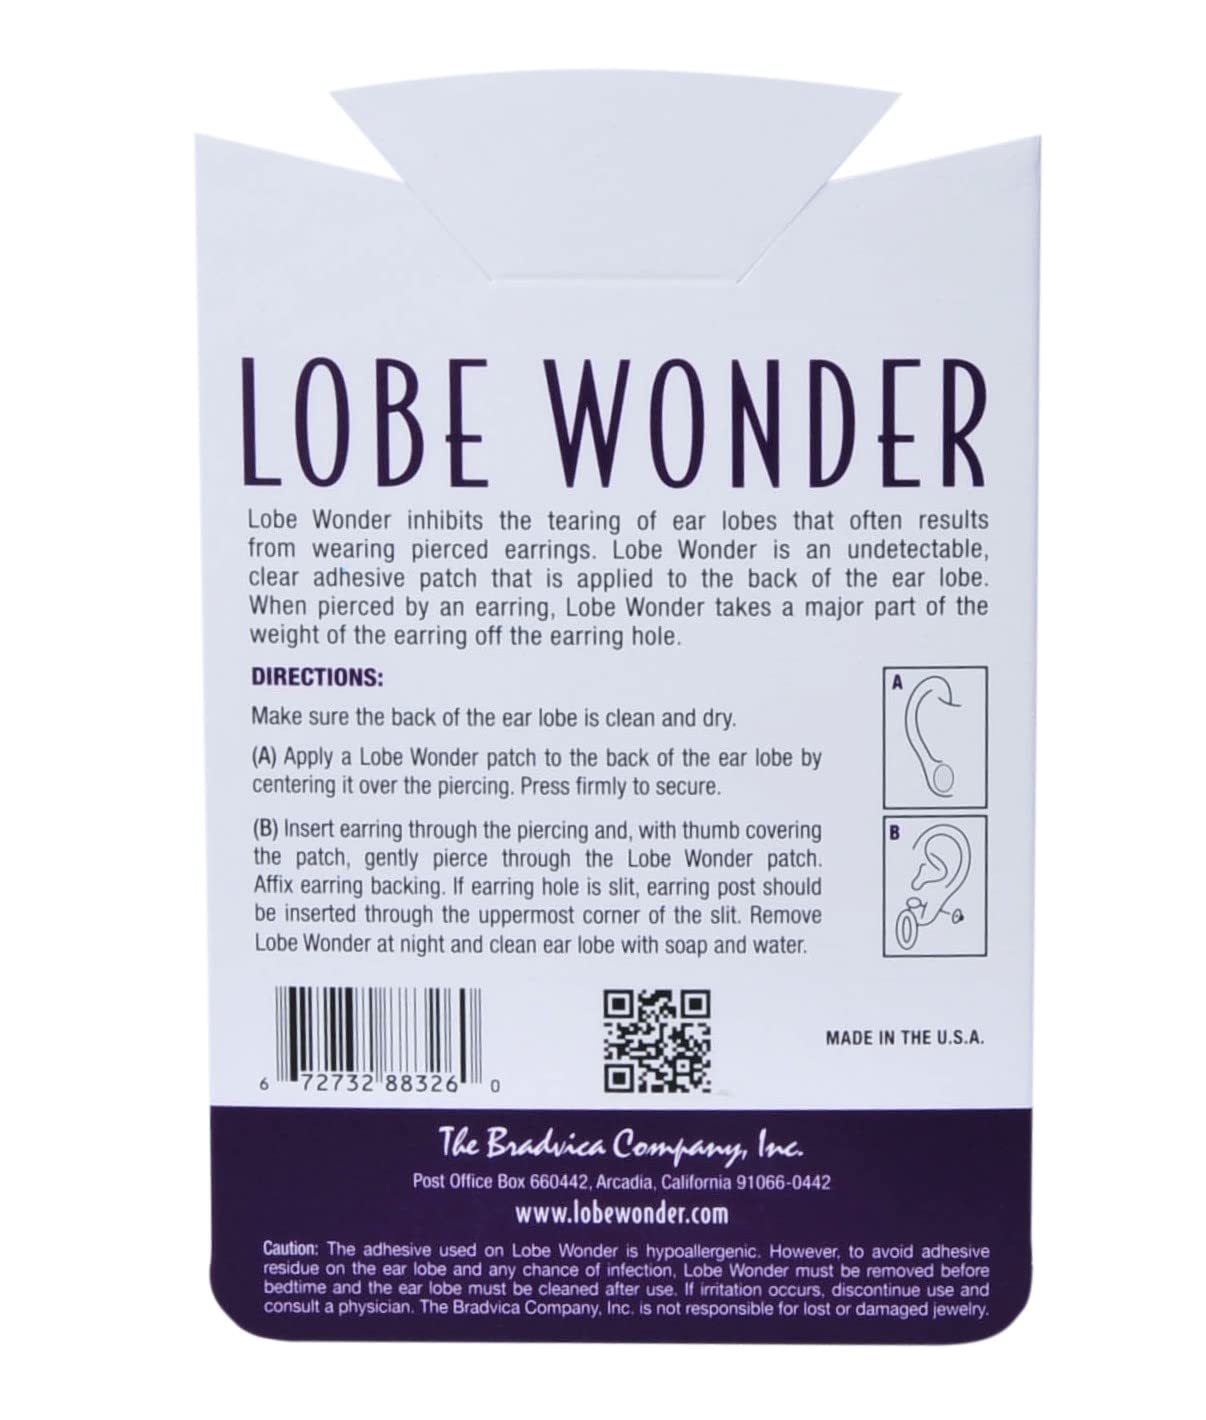 Lobe Wonder - The ORIGINAL Ear Lobe Support Patch for Pierced Ears -  Eliminates the Look of Torn or Stretched Piercings - Protects Healthy Ear  Lobes from Tearing - 300 Patches - Clear & Latex-Free